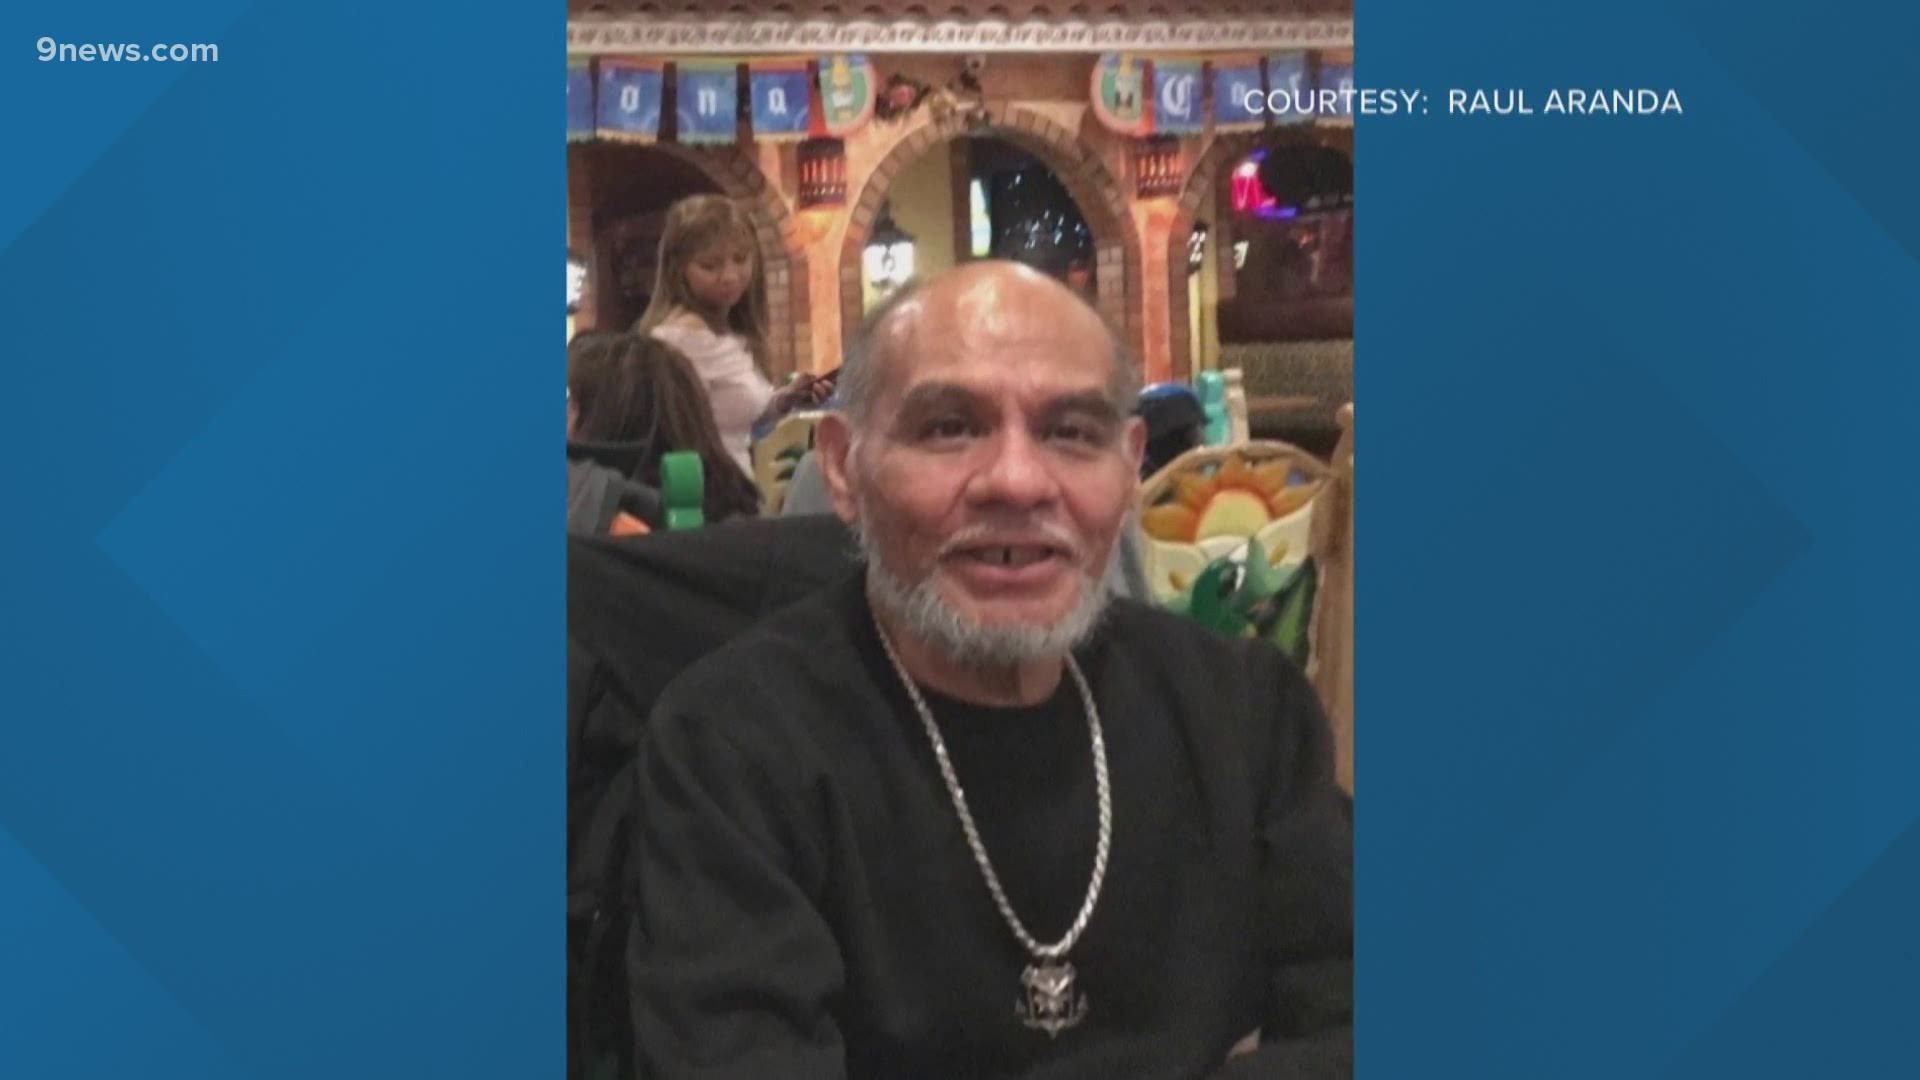 Jose Federico Aranda went missing 27 days ago. His family says it's very out of character for him and are worried about the details of the case.